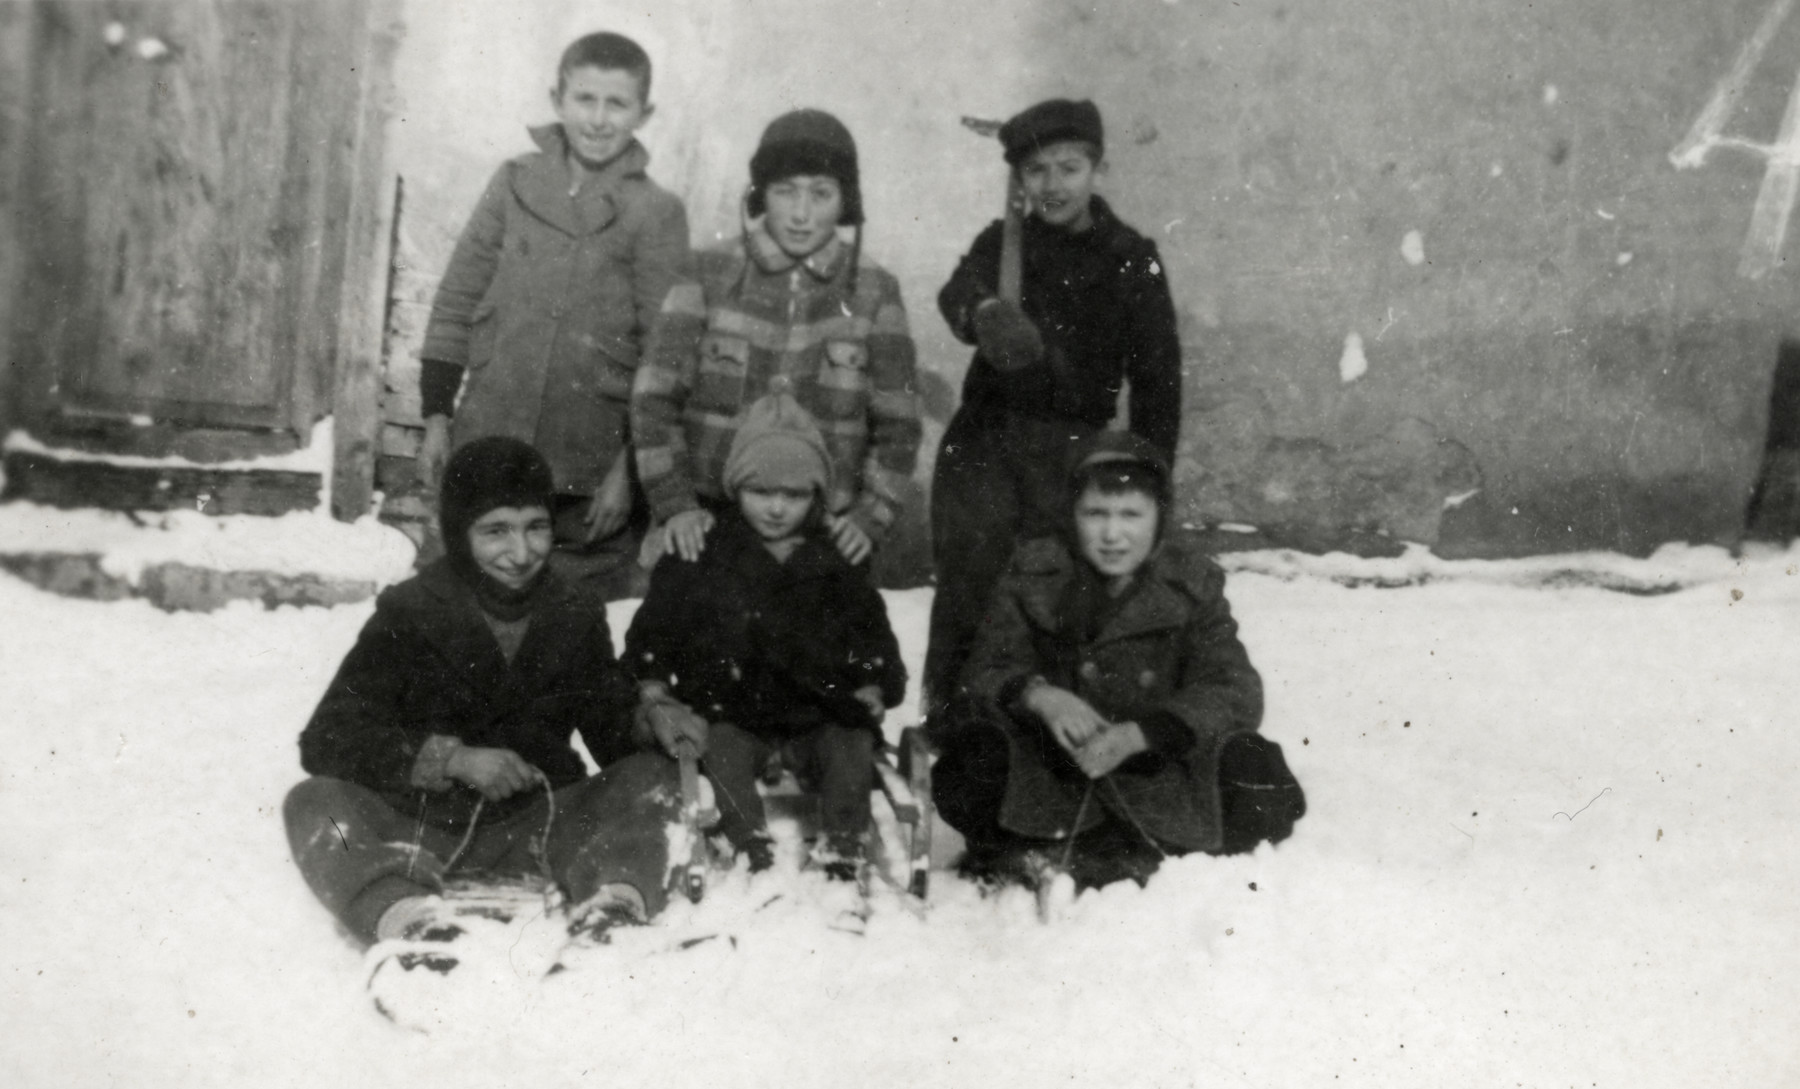 Raul Teitelbaum and his friends play in the snow.

Raul is in the second row, center.